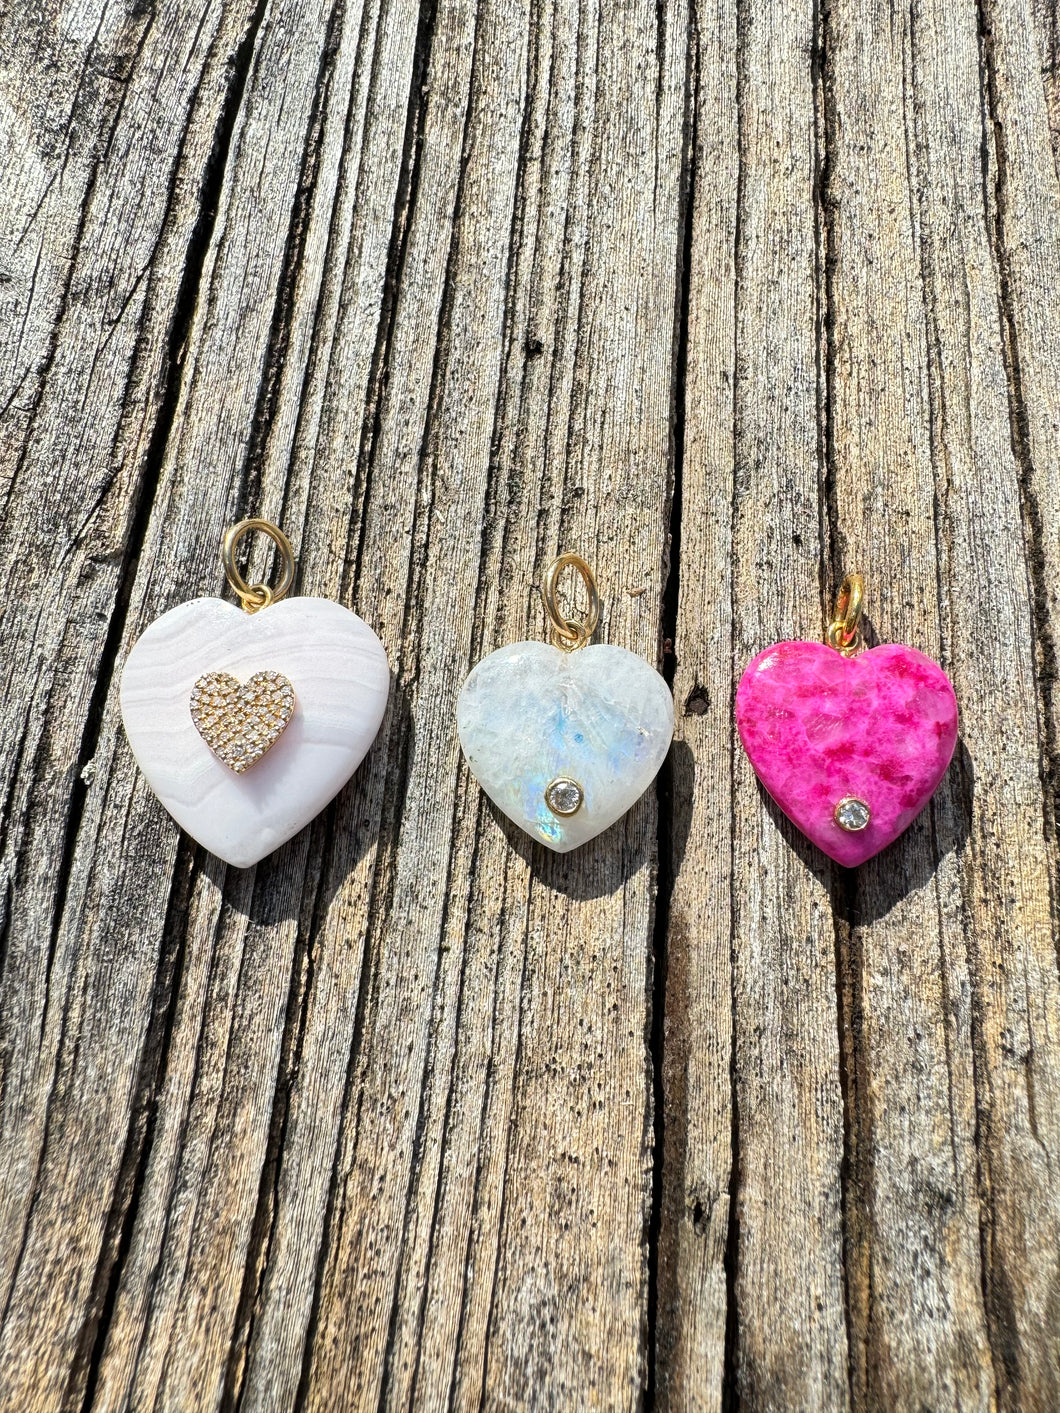 Puffy Gemstone Hearts with 14k Gold Details